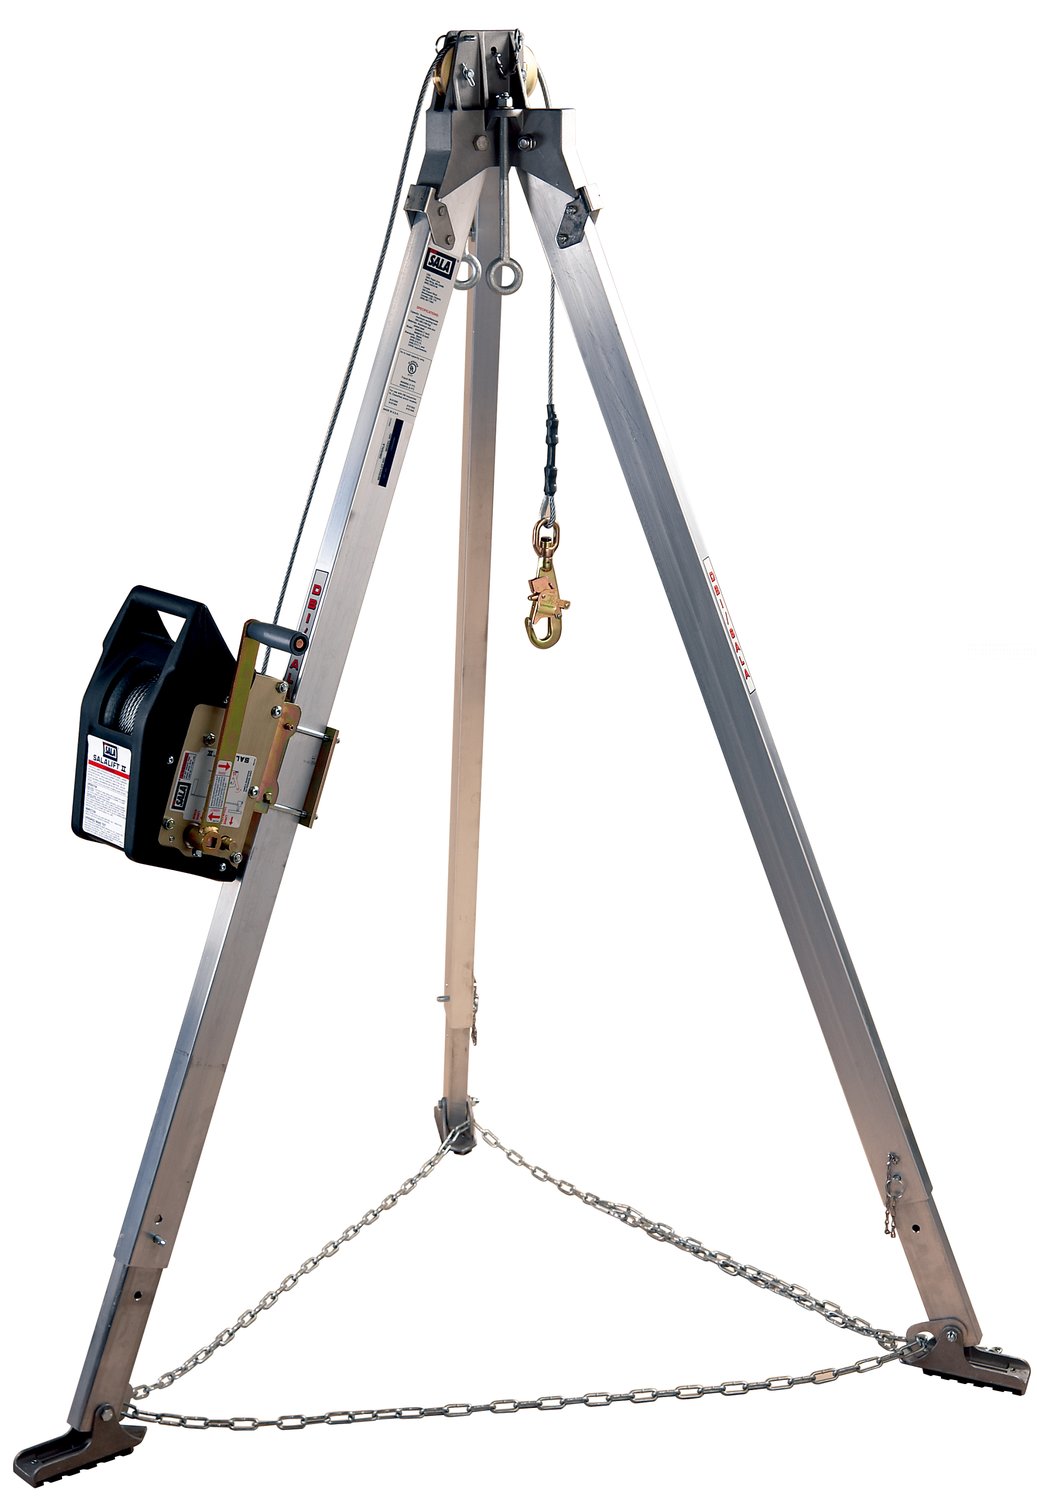 7100310059 - 3M DBI-SALA Confined Space Aluminum Tripod with Winch 8300033, 7 ft
High, 90 ft Stainless Steel Cable